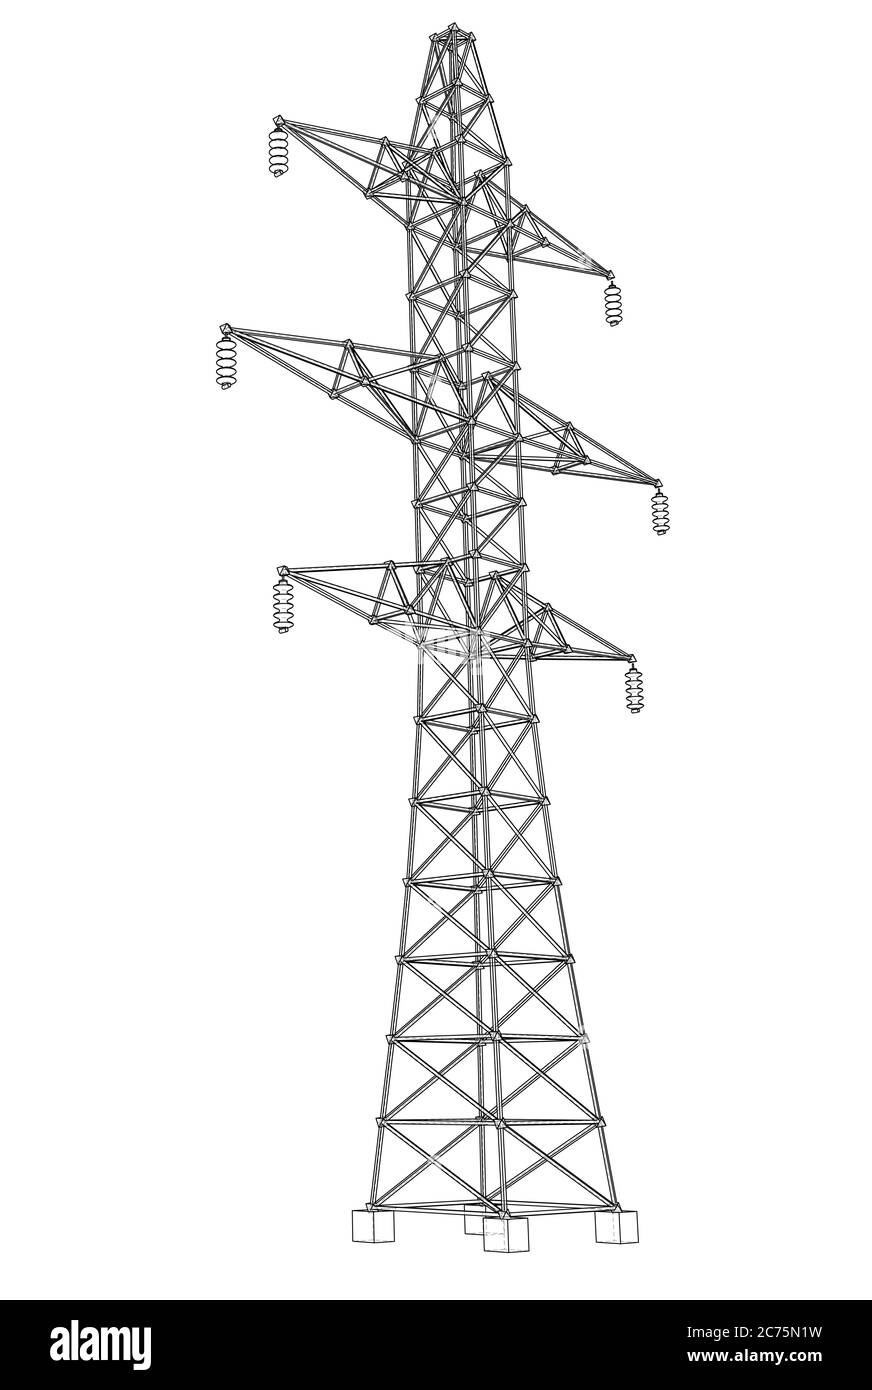 Electric pylon or electric tower concept Stock Photo